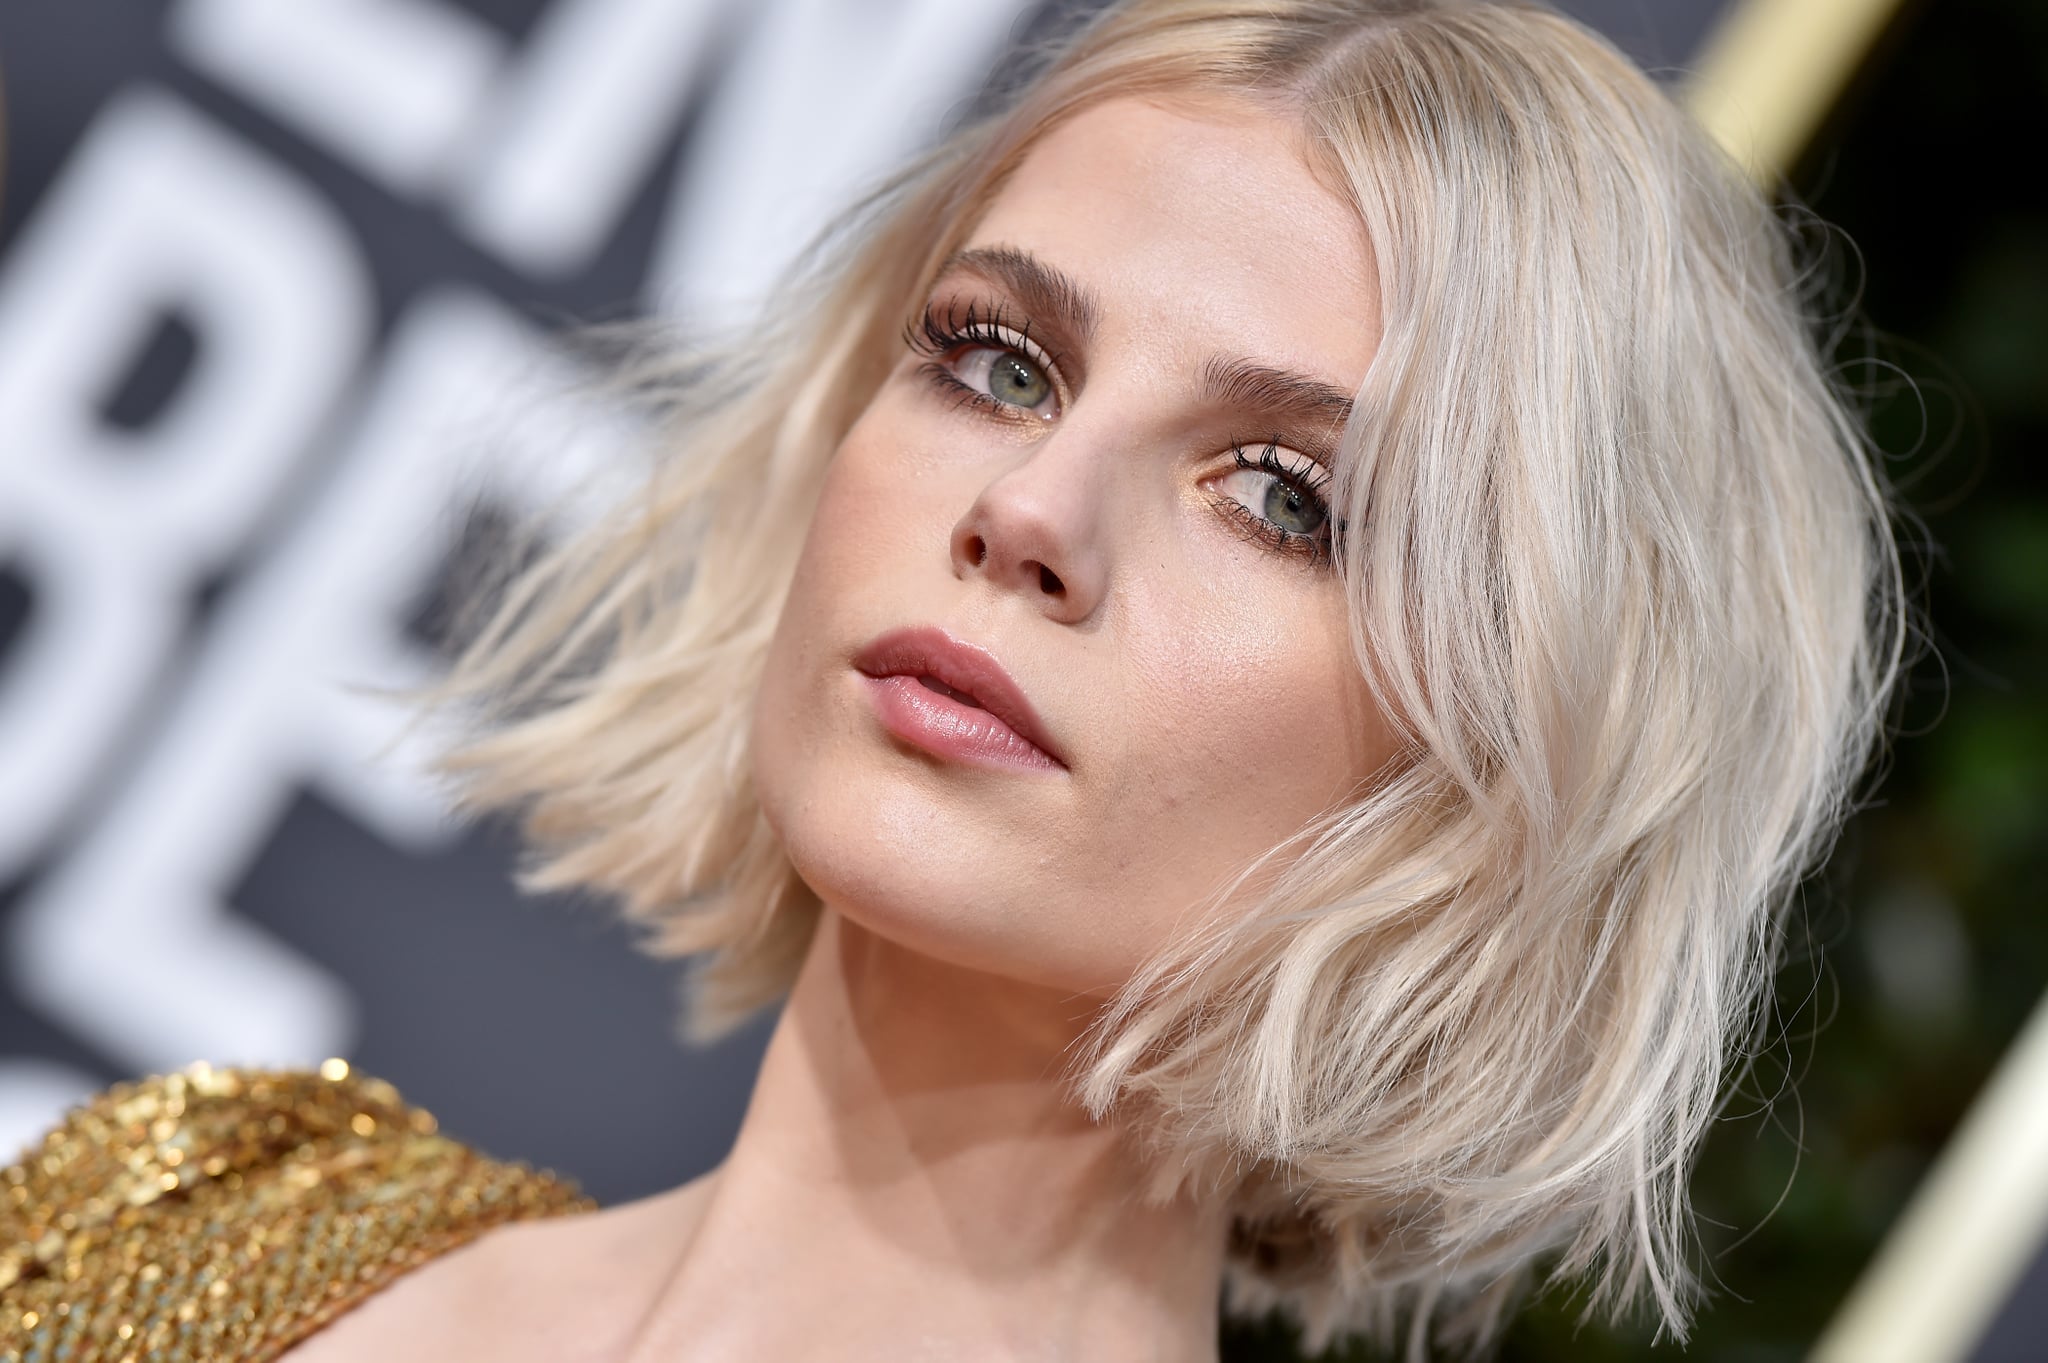 BEVERLY HILLS, CA - JANUARY 06:  Lucy Boynton attends the 76th Annual Golden Globe Awards at The Beverly Hilton Hotel on January 6, 2019 in Beverly Hills, California.  (Photo by Axelle/Bauer-Griffin/FilmMagic)